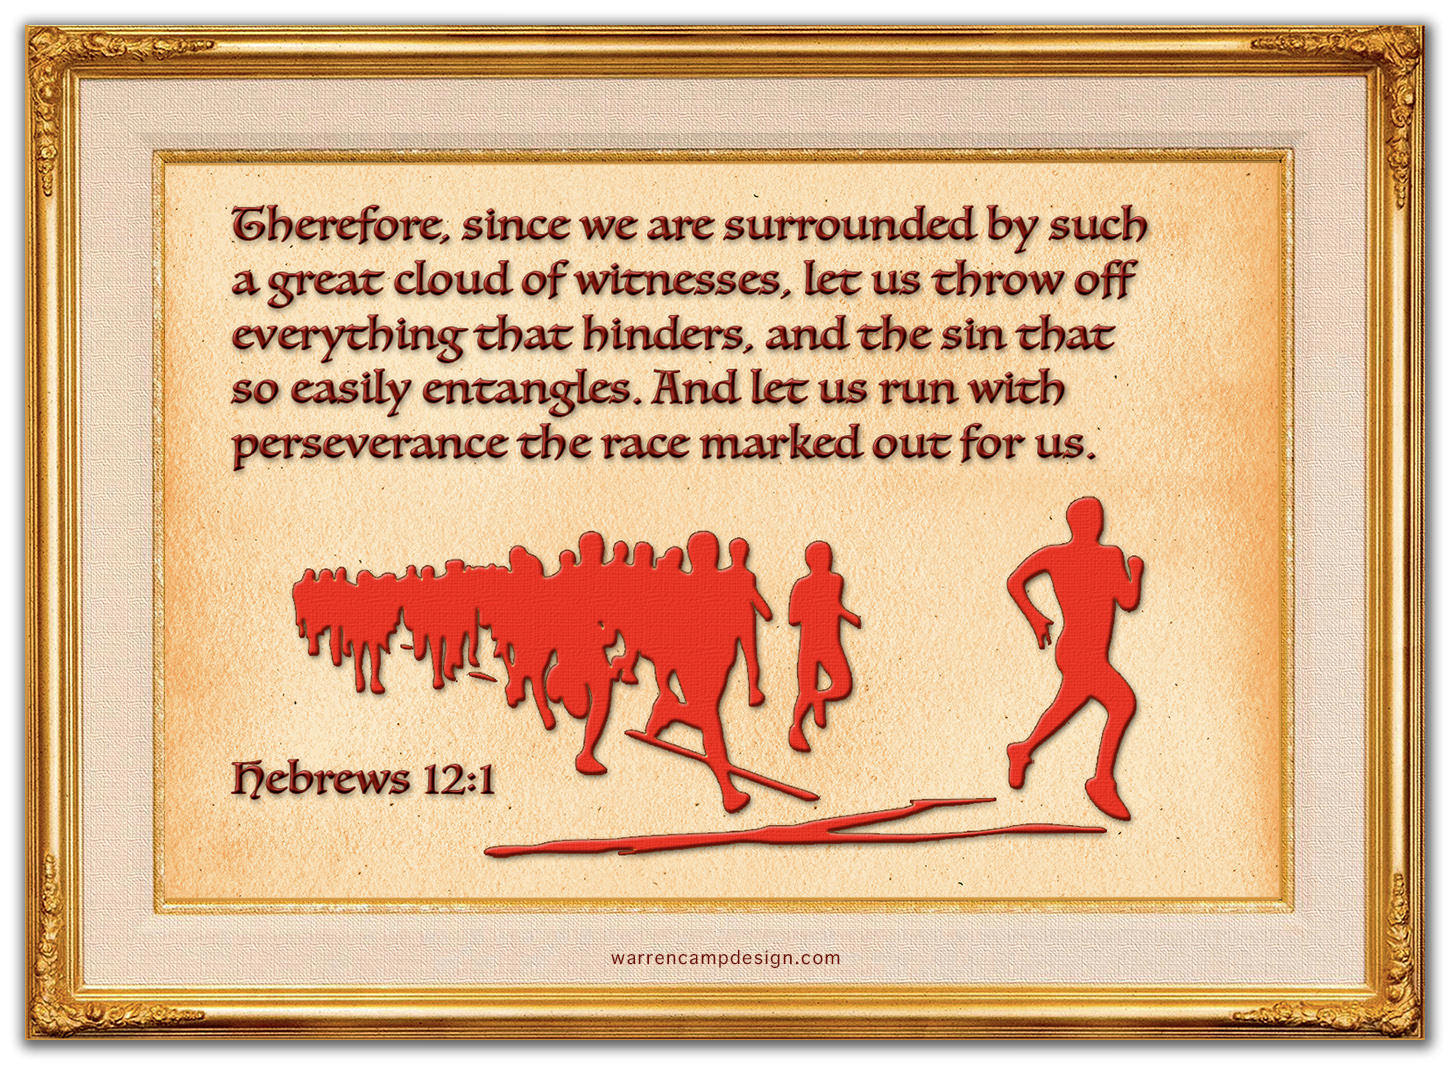 Scripture picture of Hebrews 12:1, emphasizing the importance for us to throw off every hindrance and sin so we can run our race with perseverance.